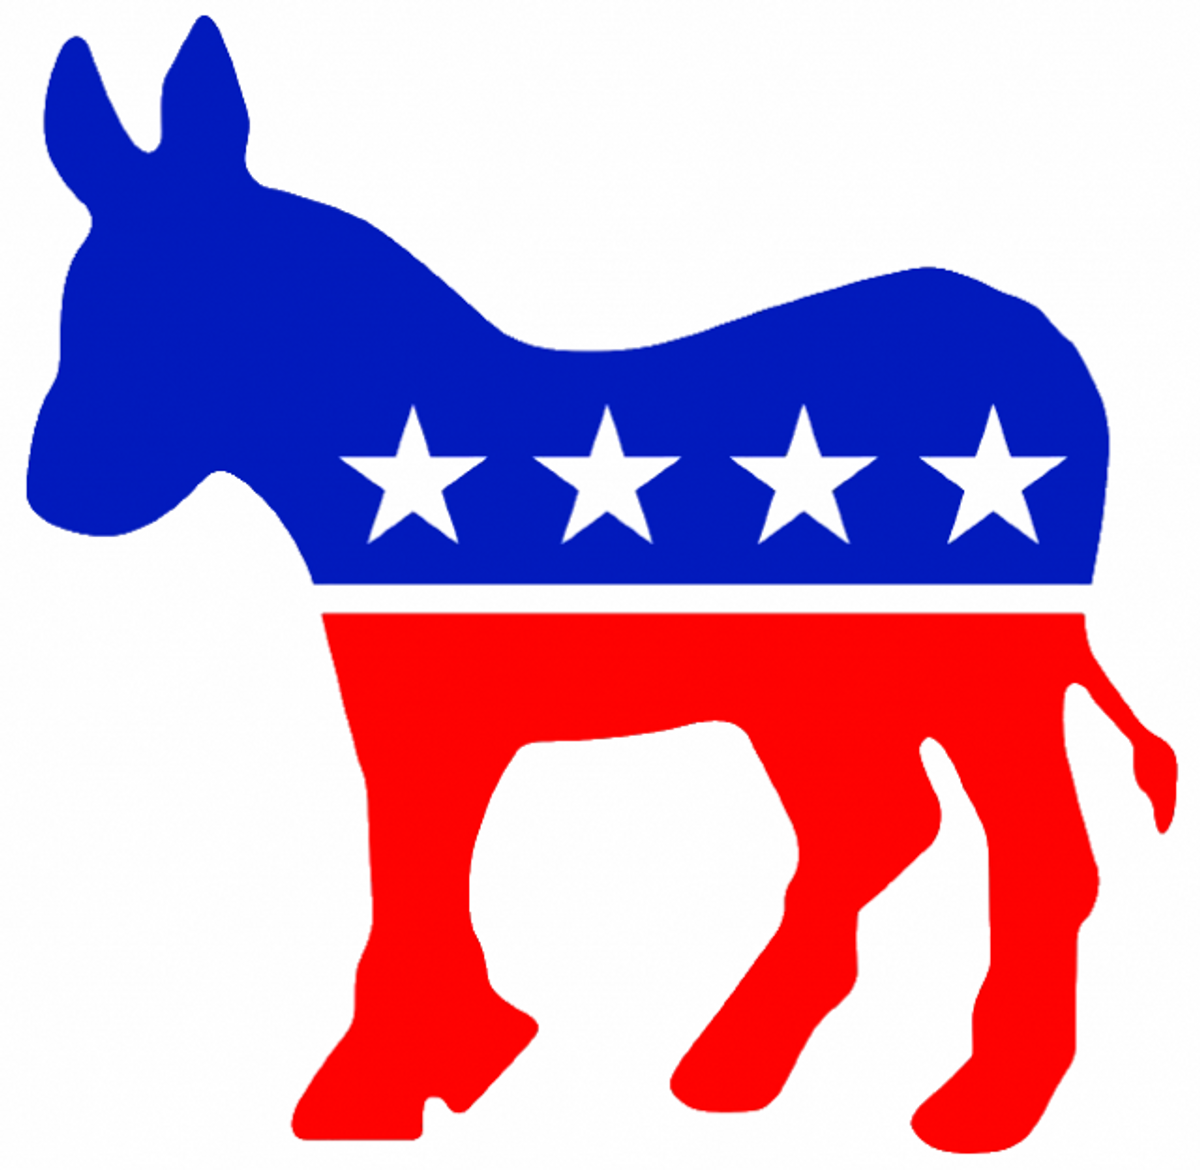 Presidential Candidates: Meet The Democrats